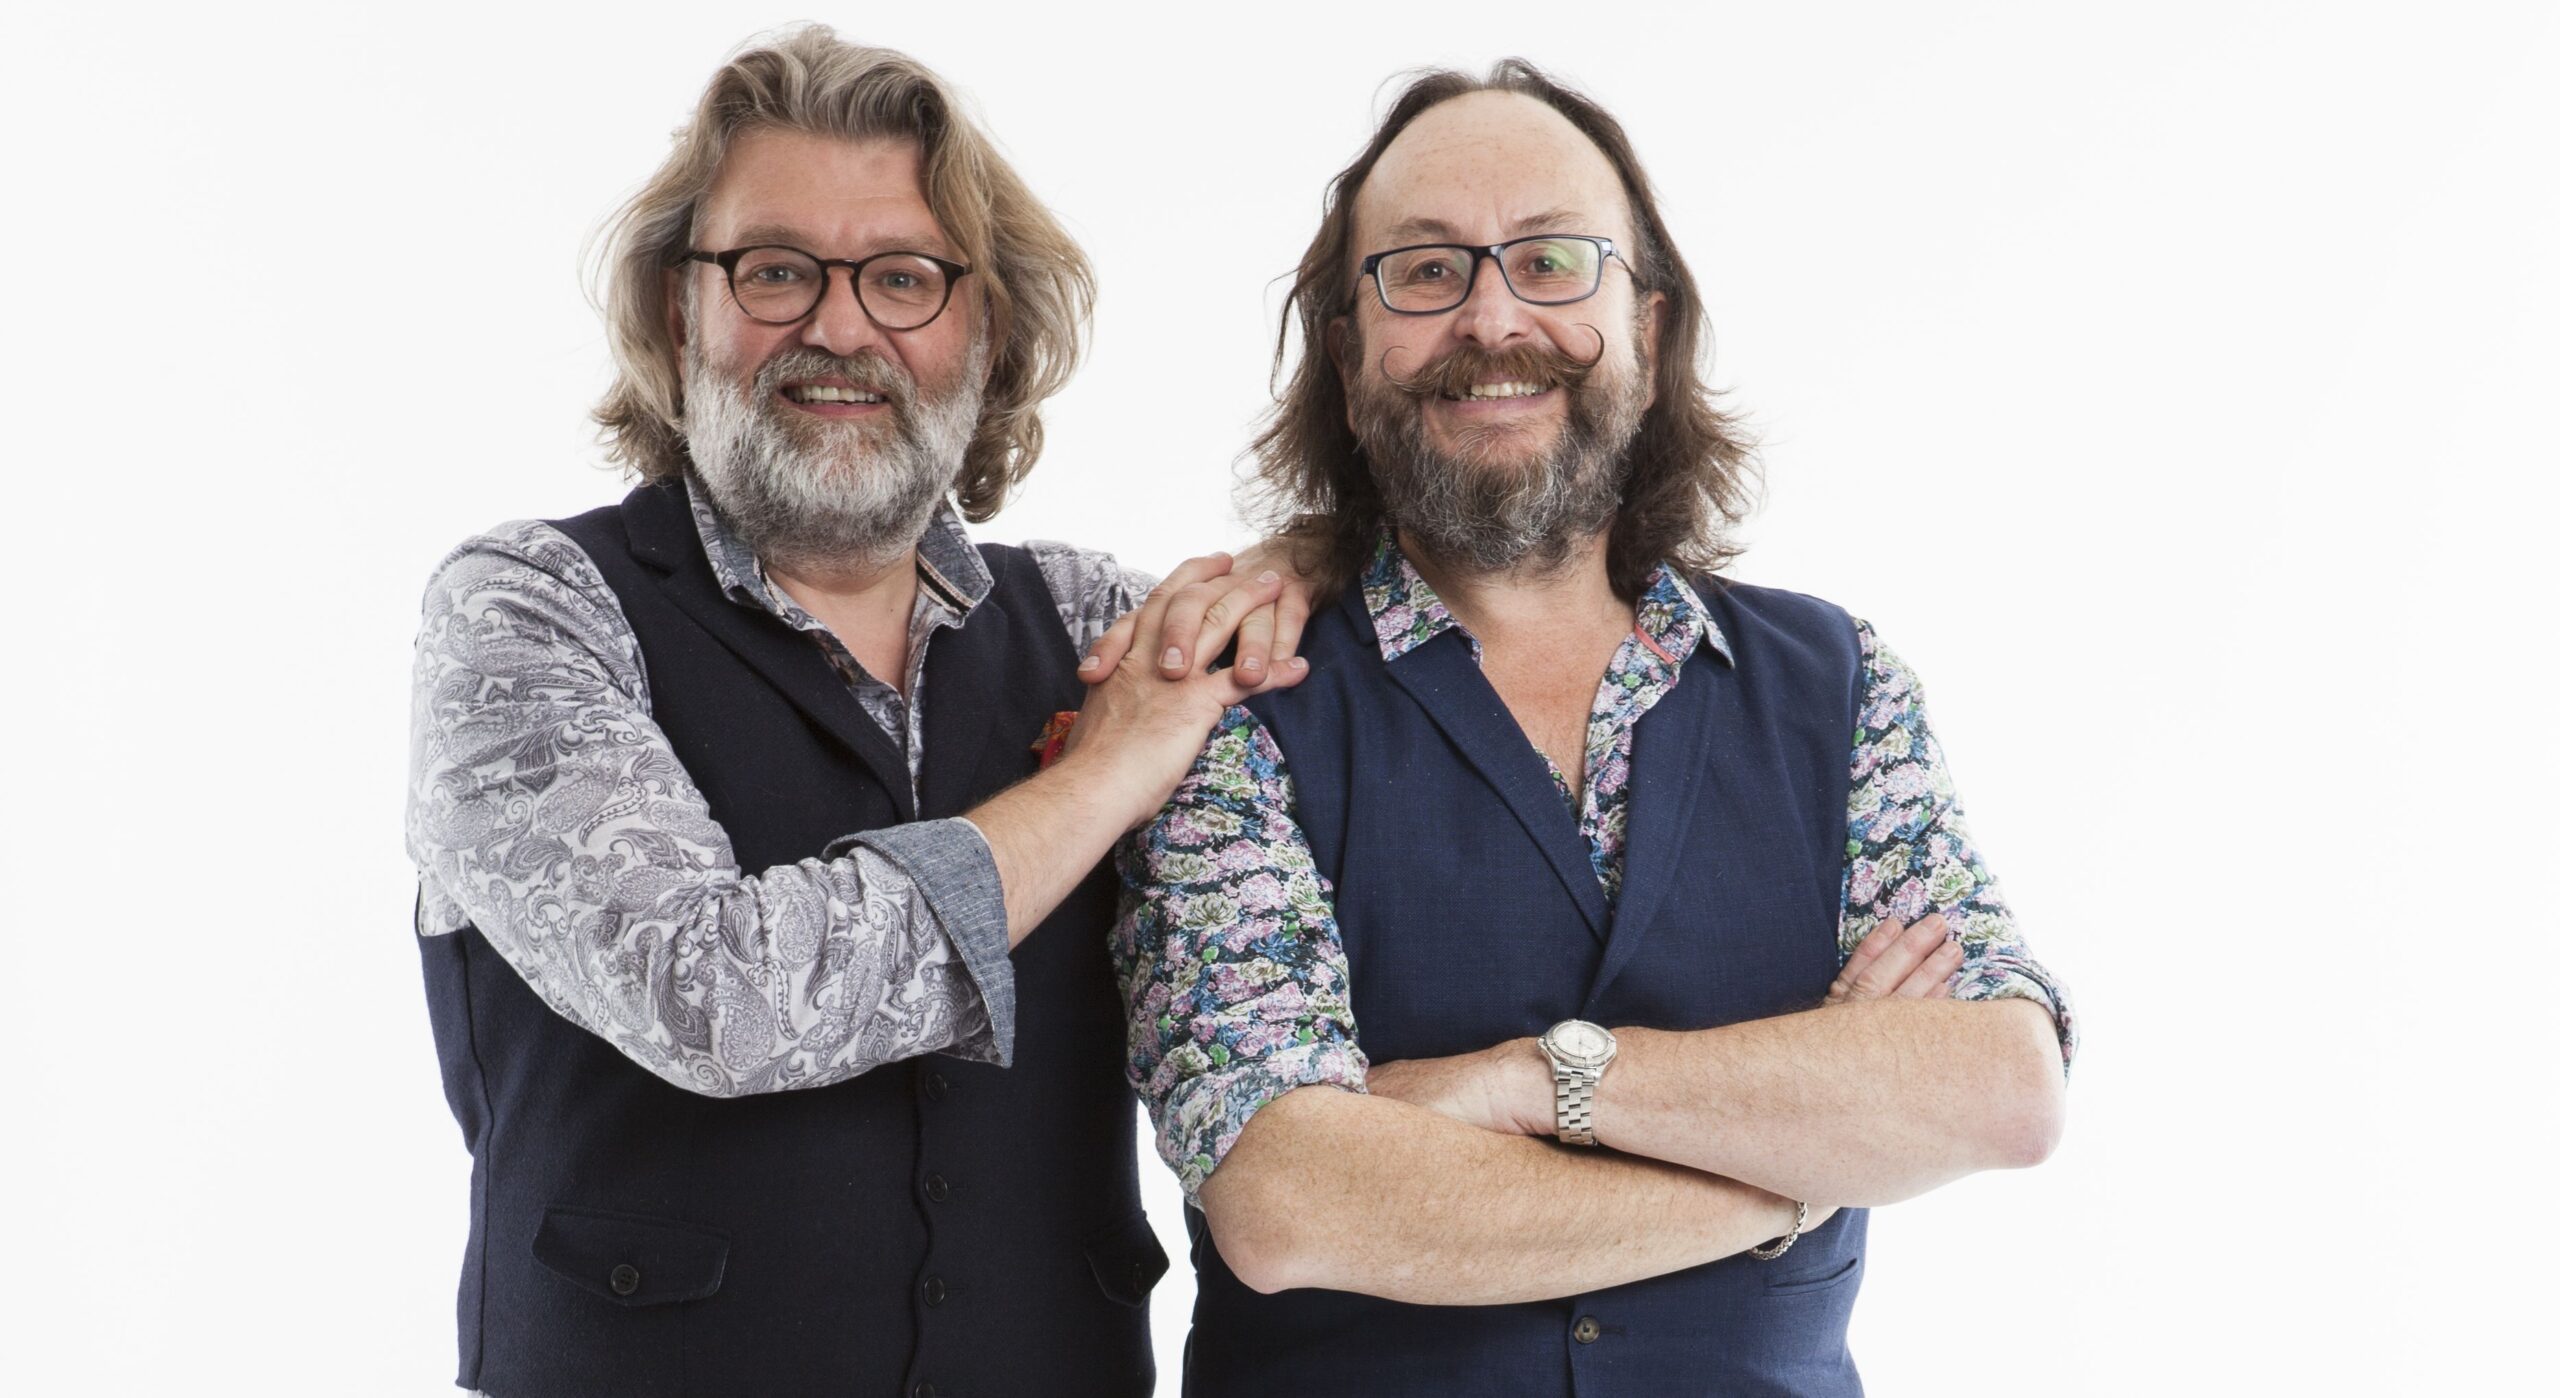 Hairy Bikers Si King (left) and Dave Myers (right) will star at Southport Flower Show 2021